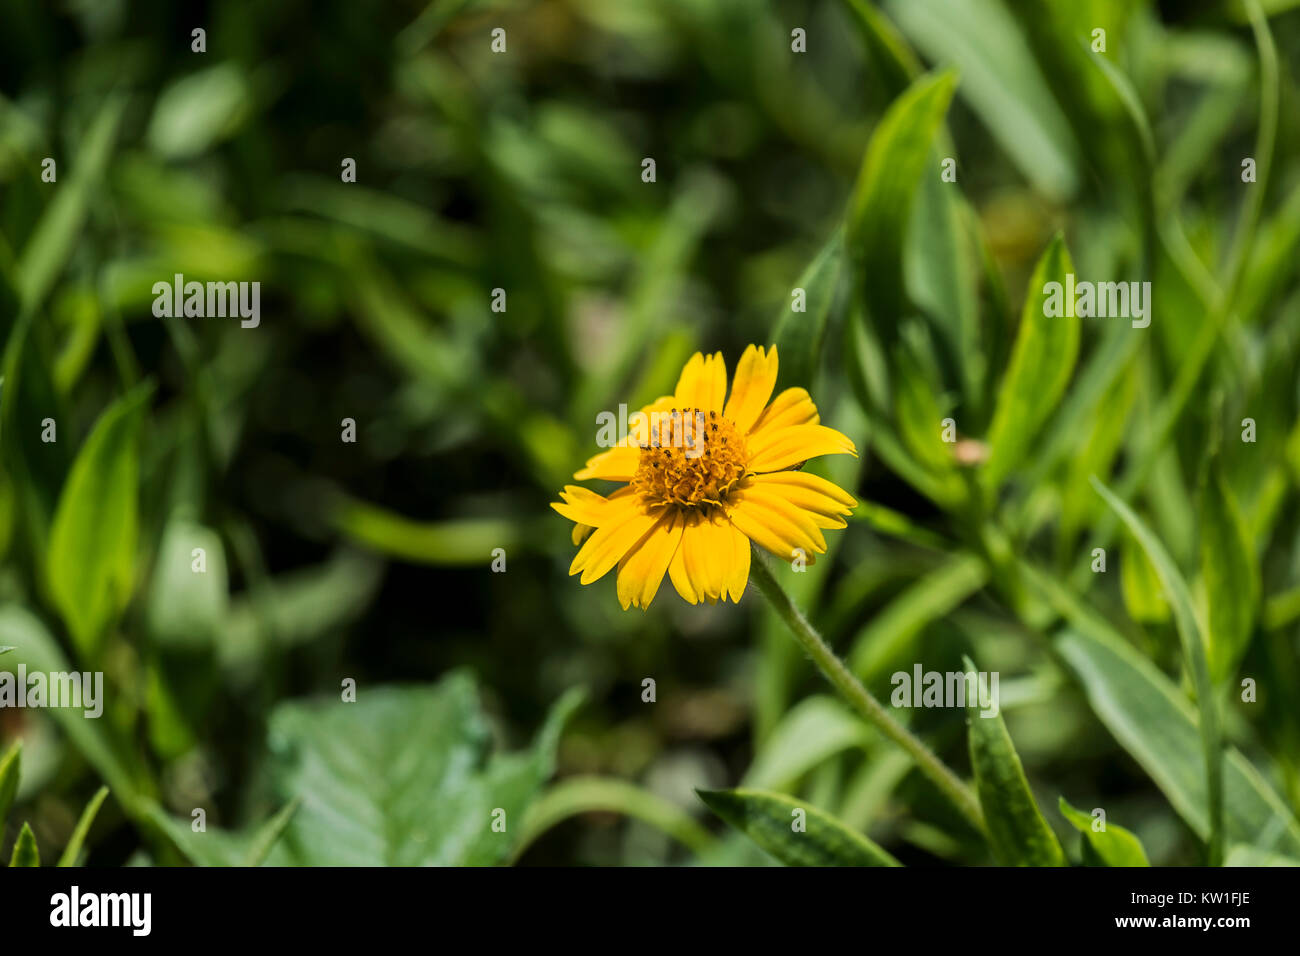 Flower of a bright yellow chrysanthemum with a convex center (Coleostephus myconis) Stock Photo